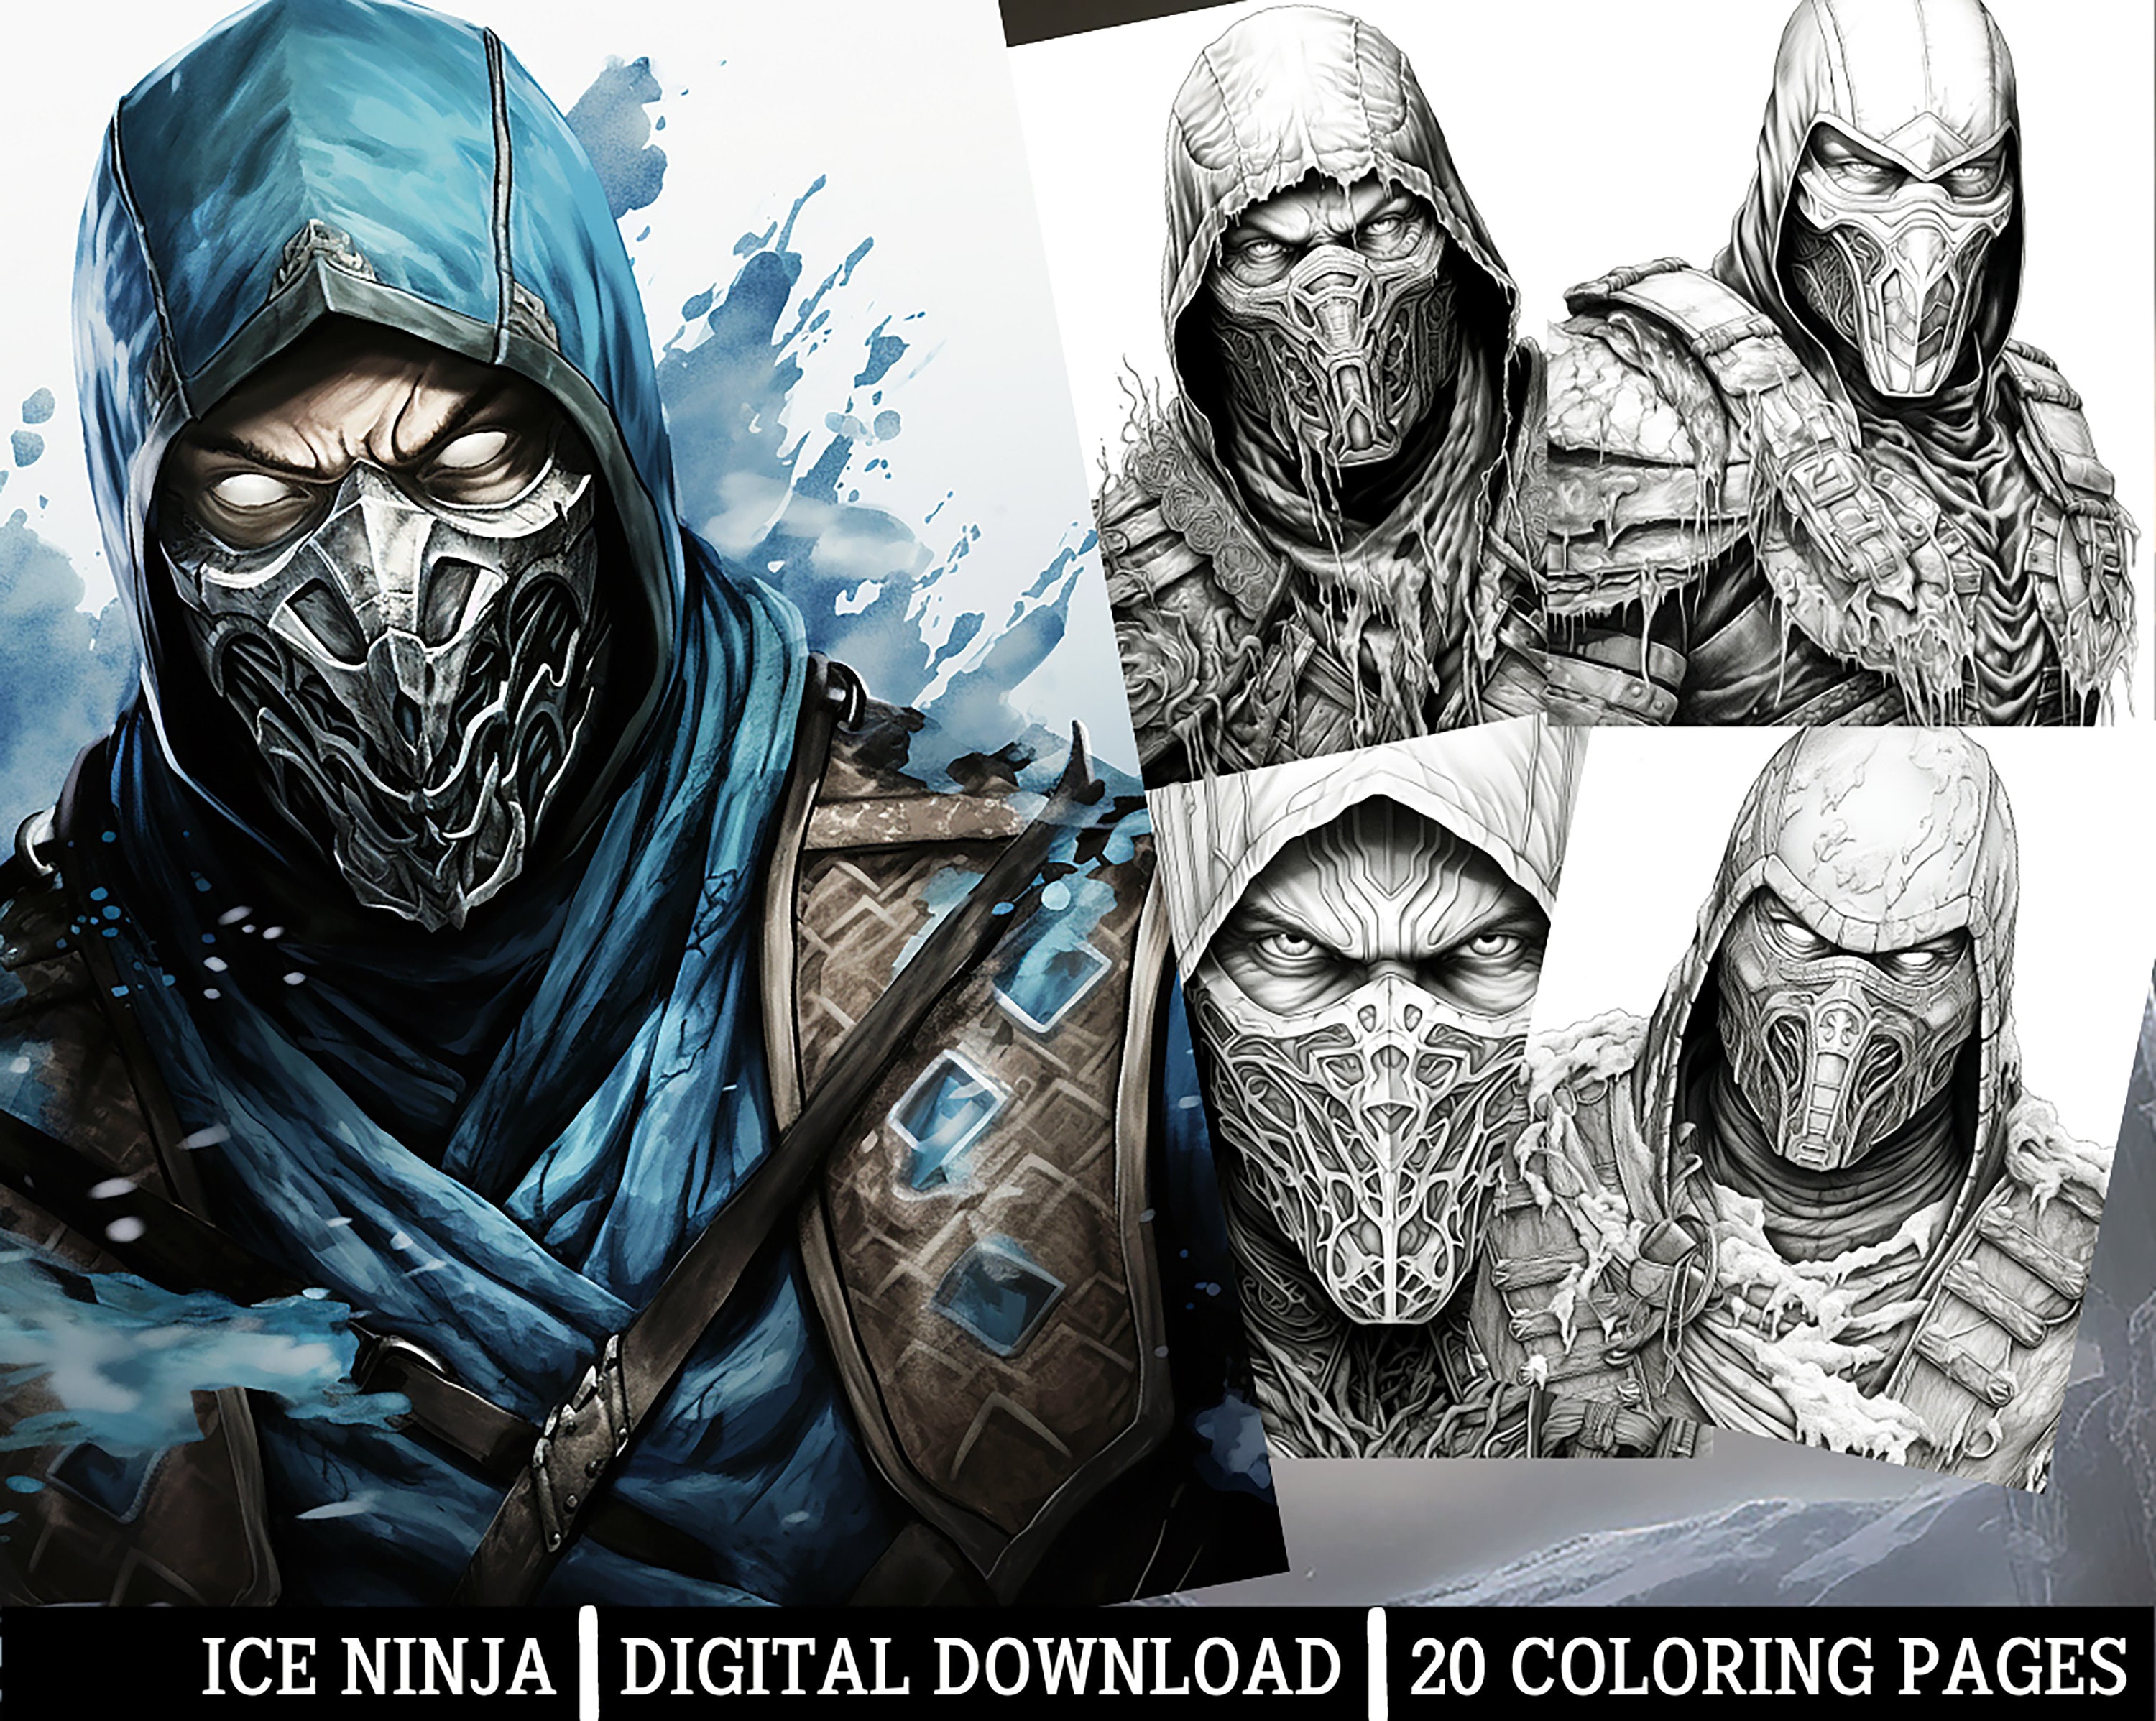 Ice ninja coloring pages for adults instant download grayscale coloring pageprintable pngjpeg horror themed movie and game inspired art